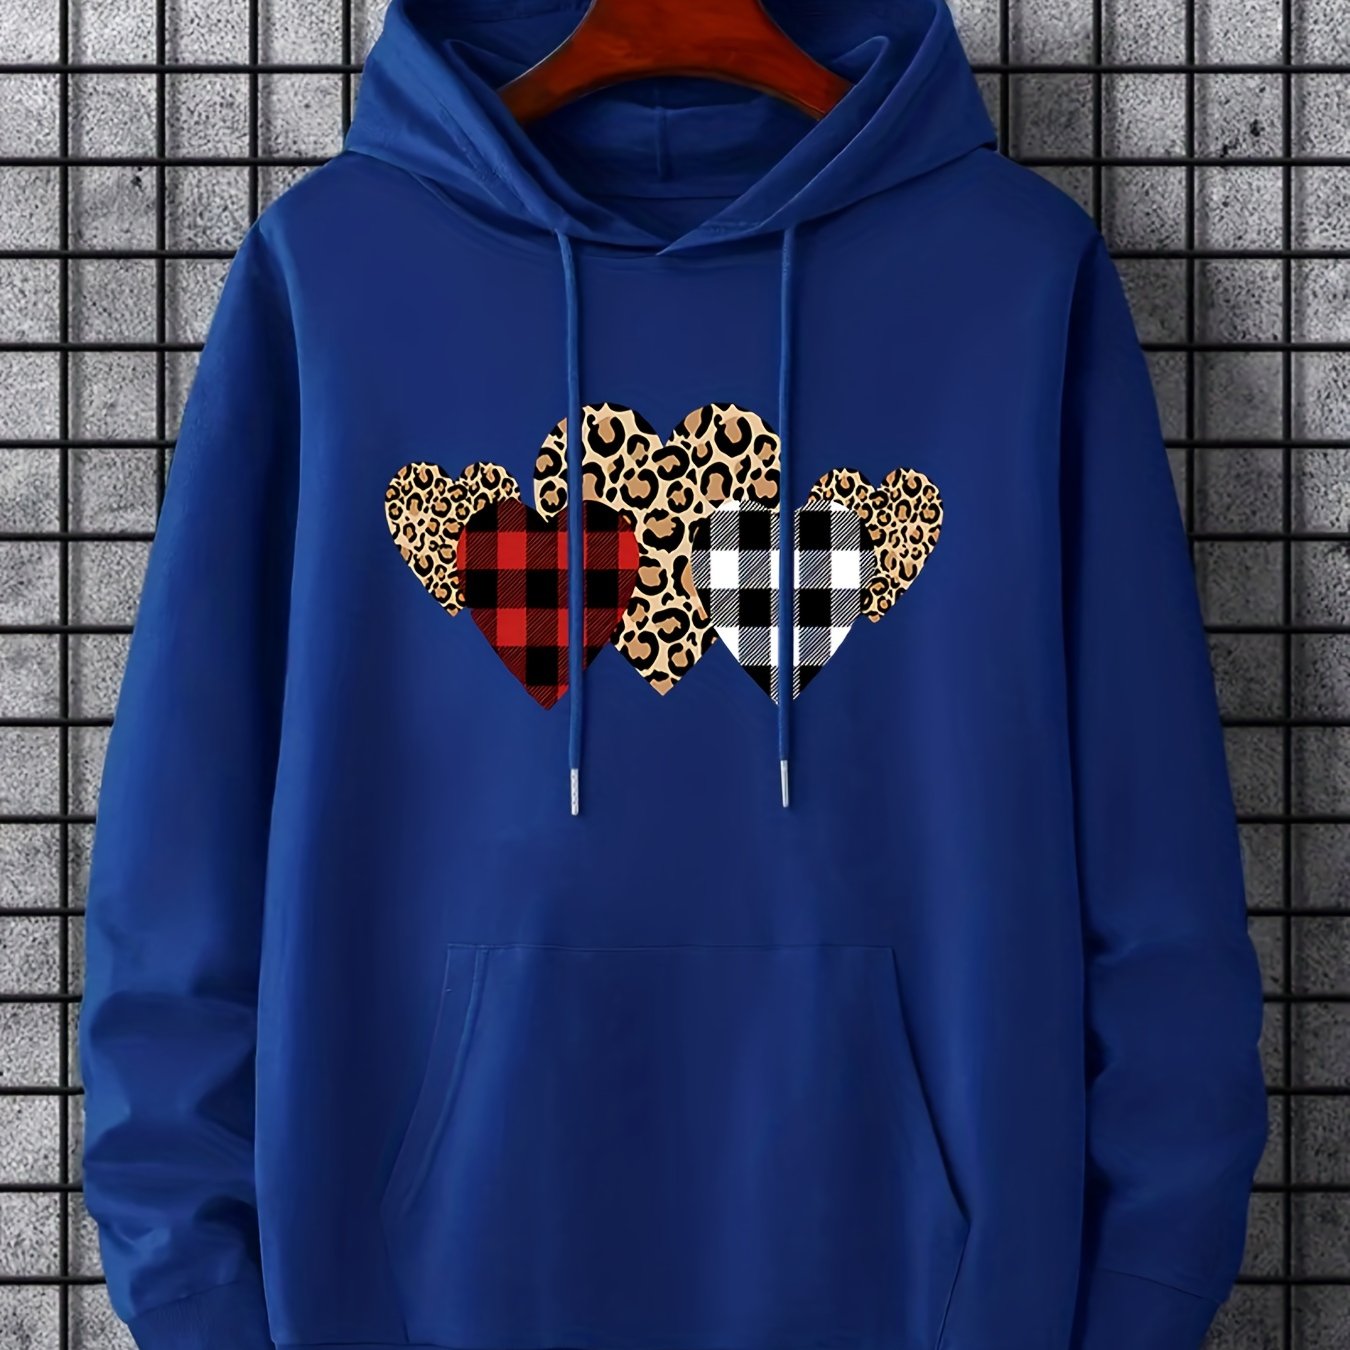 Hoodies For Men, Leopard Plaid Hearts Graphic Hoodie, Men's Casual Pullover Hooded Sweatshirt With Kangaroo Pocket For Spring Fall, As Gifts